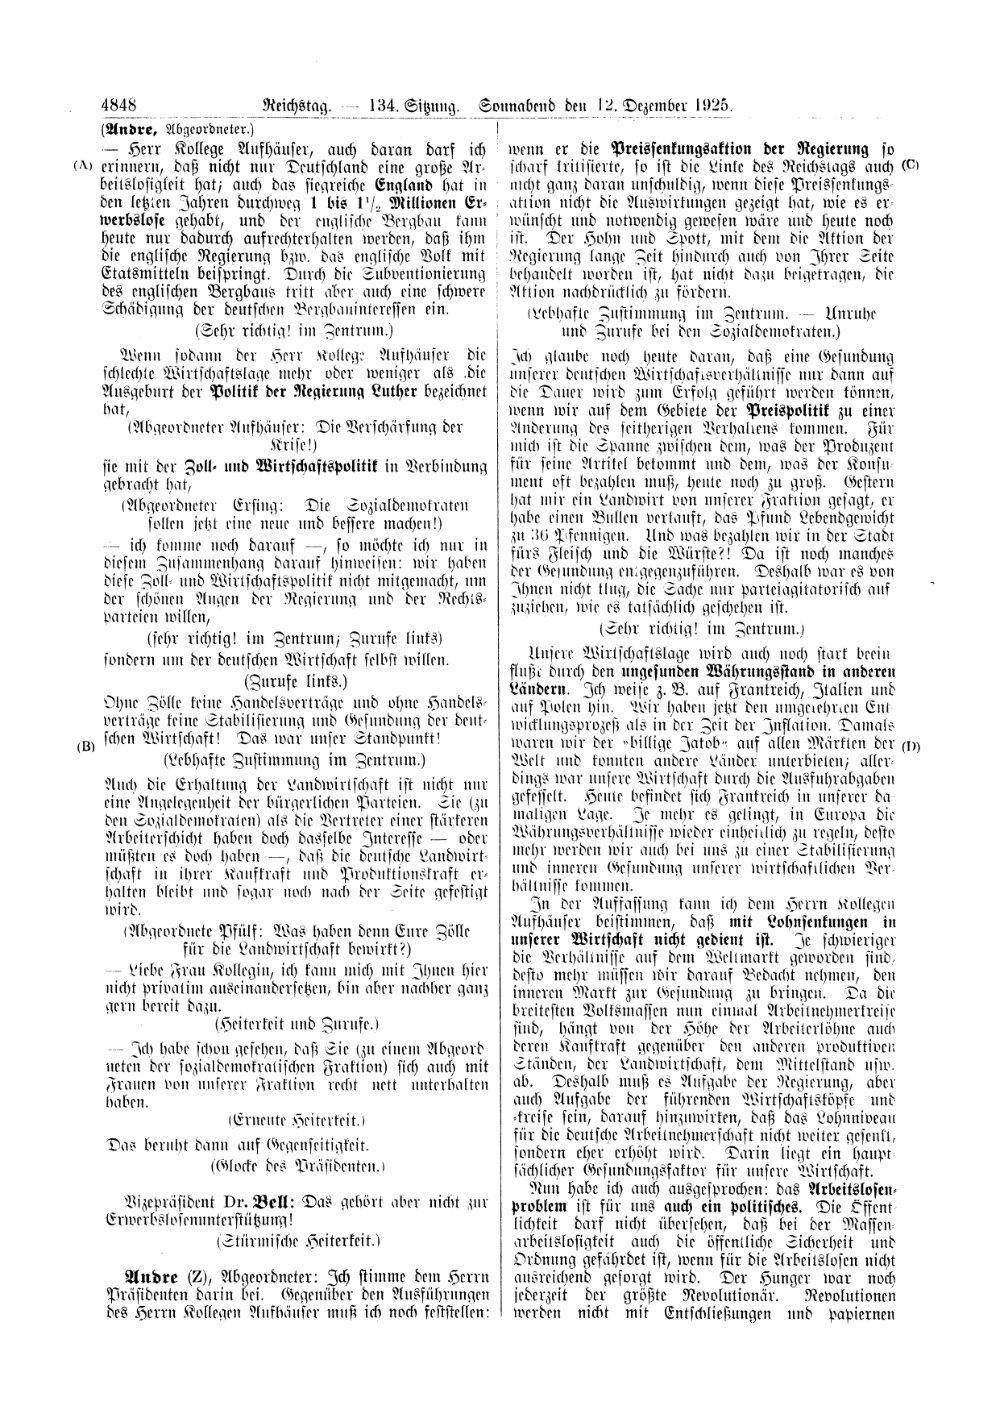 Scan of page 4848